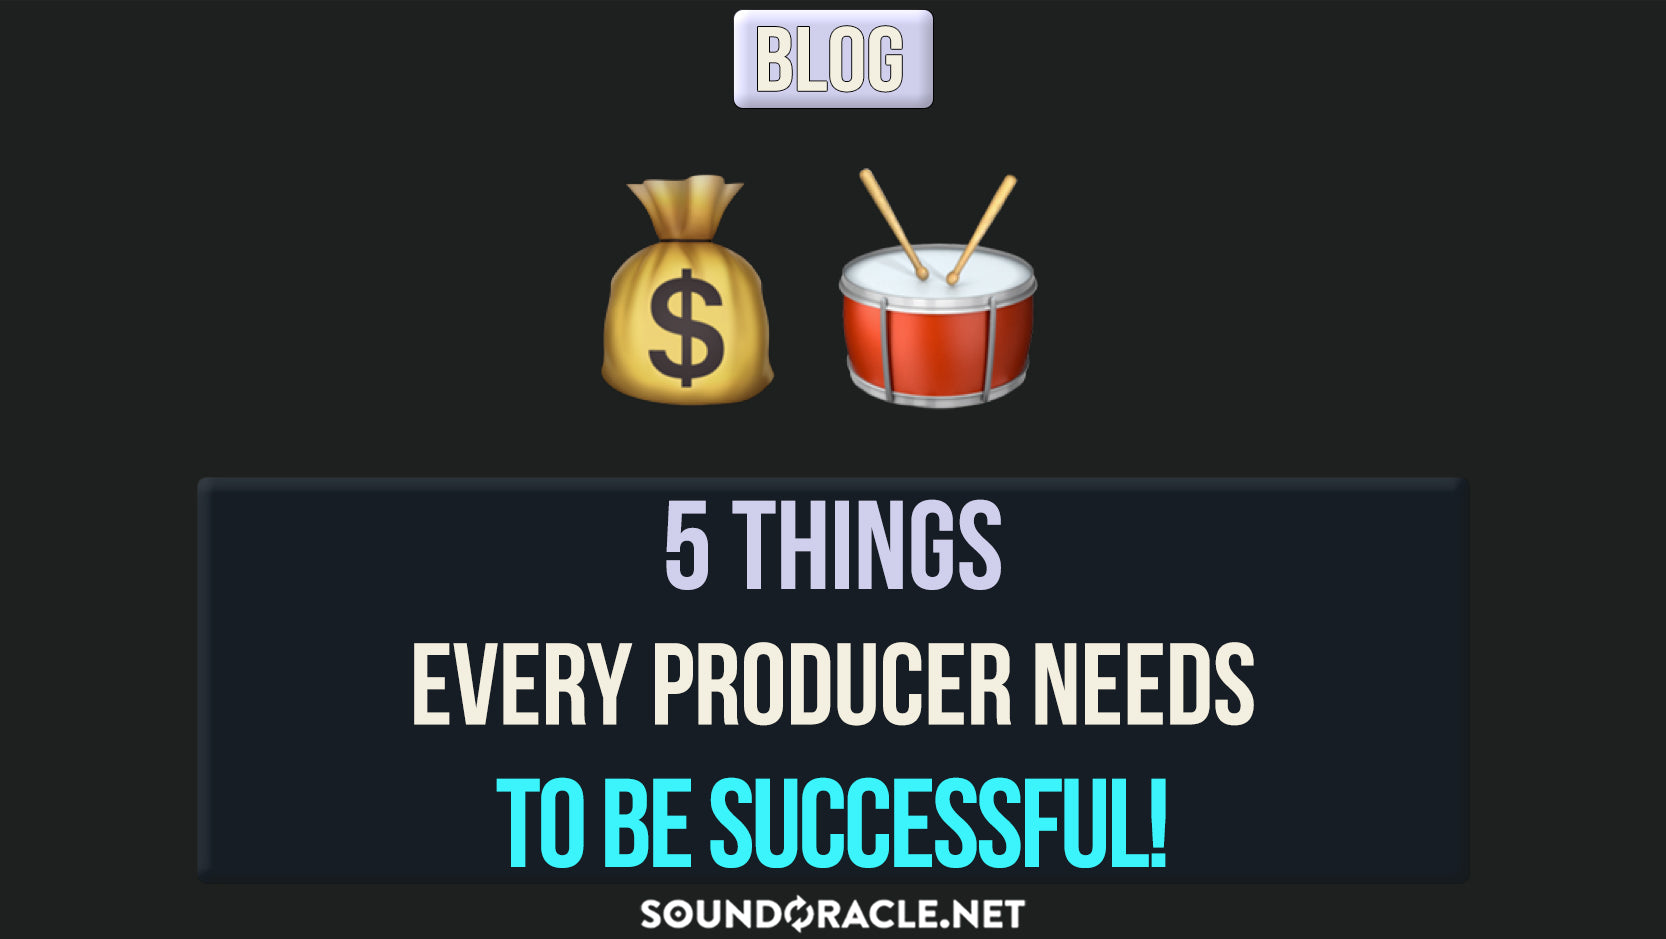 5 Things Every Producer Needs To Be Successful